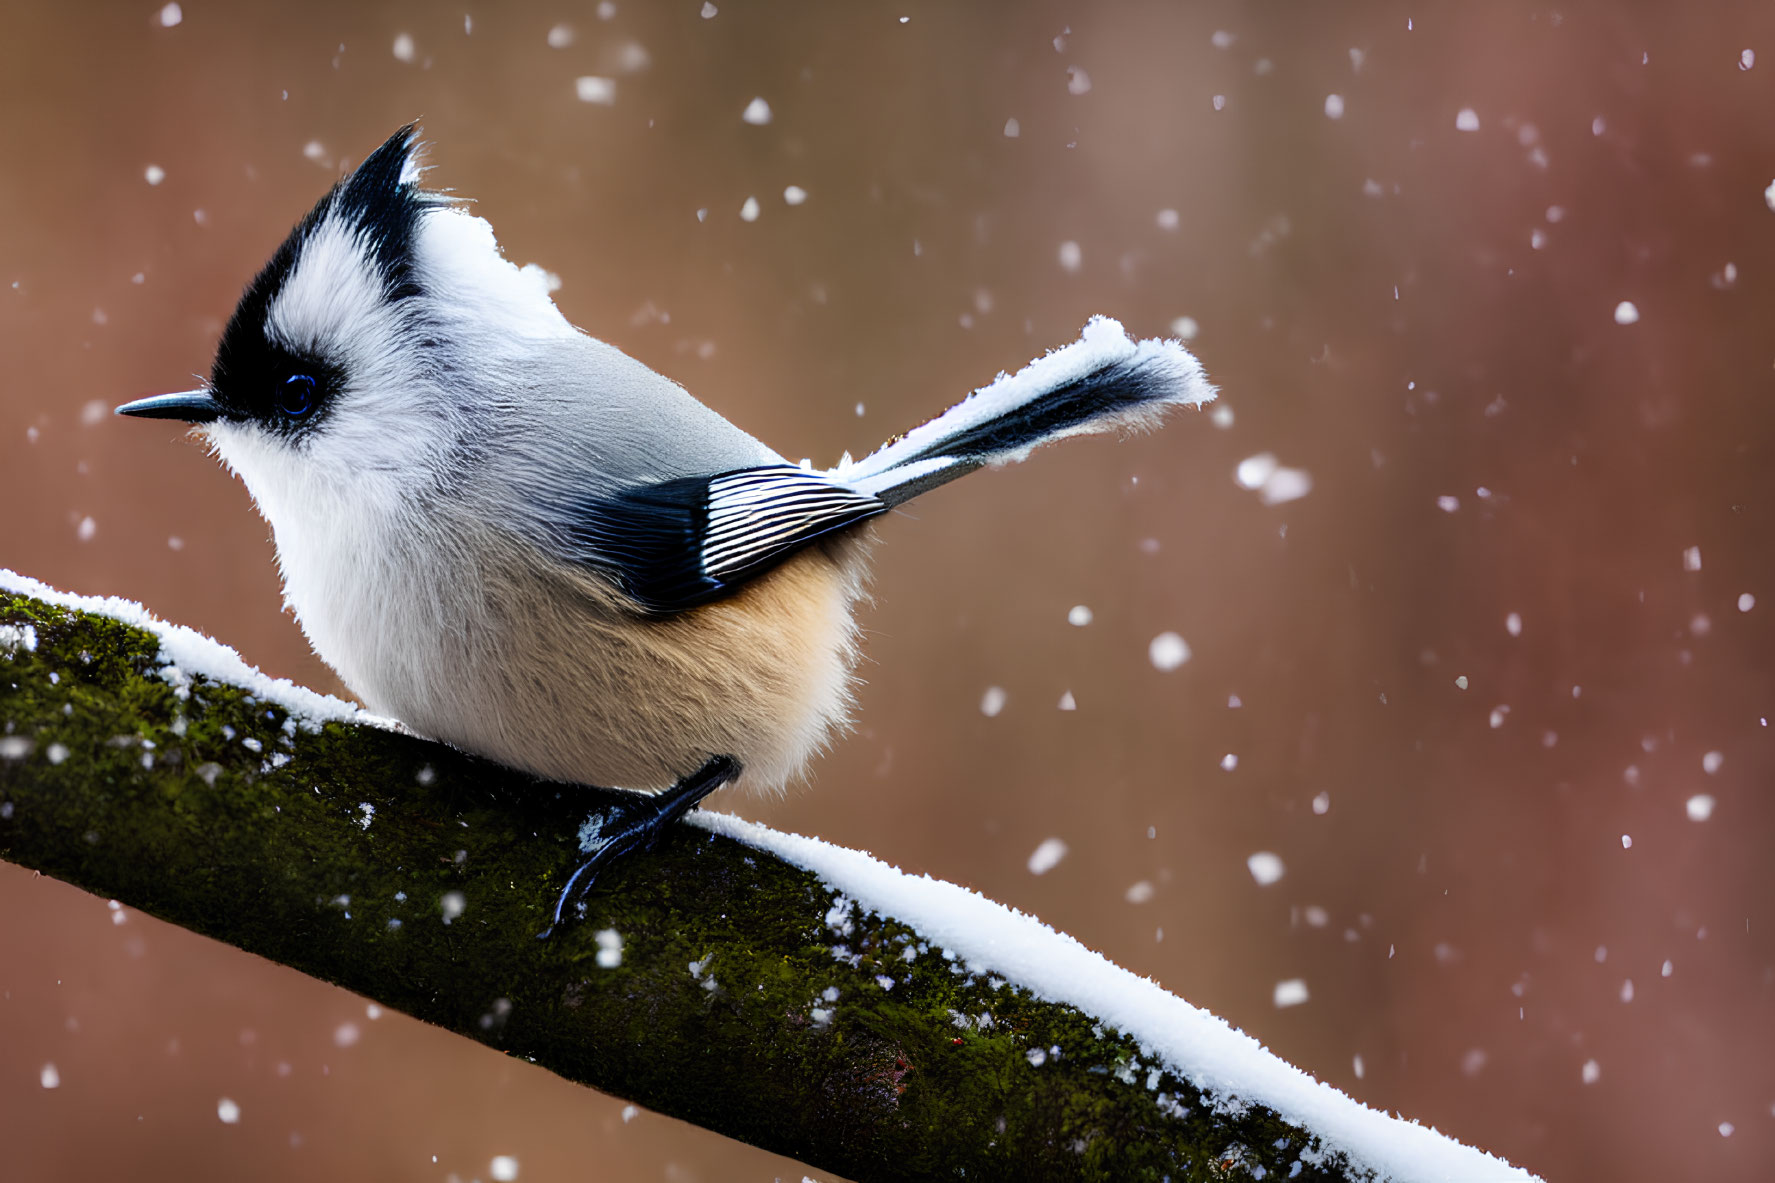 Tufted Titmouse on Snow-Covered Branch with Falling Snowflakes